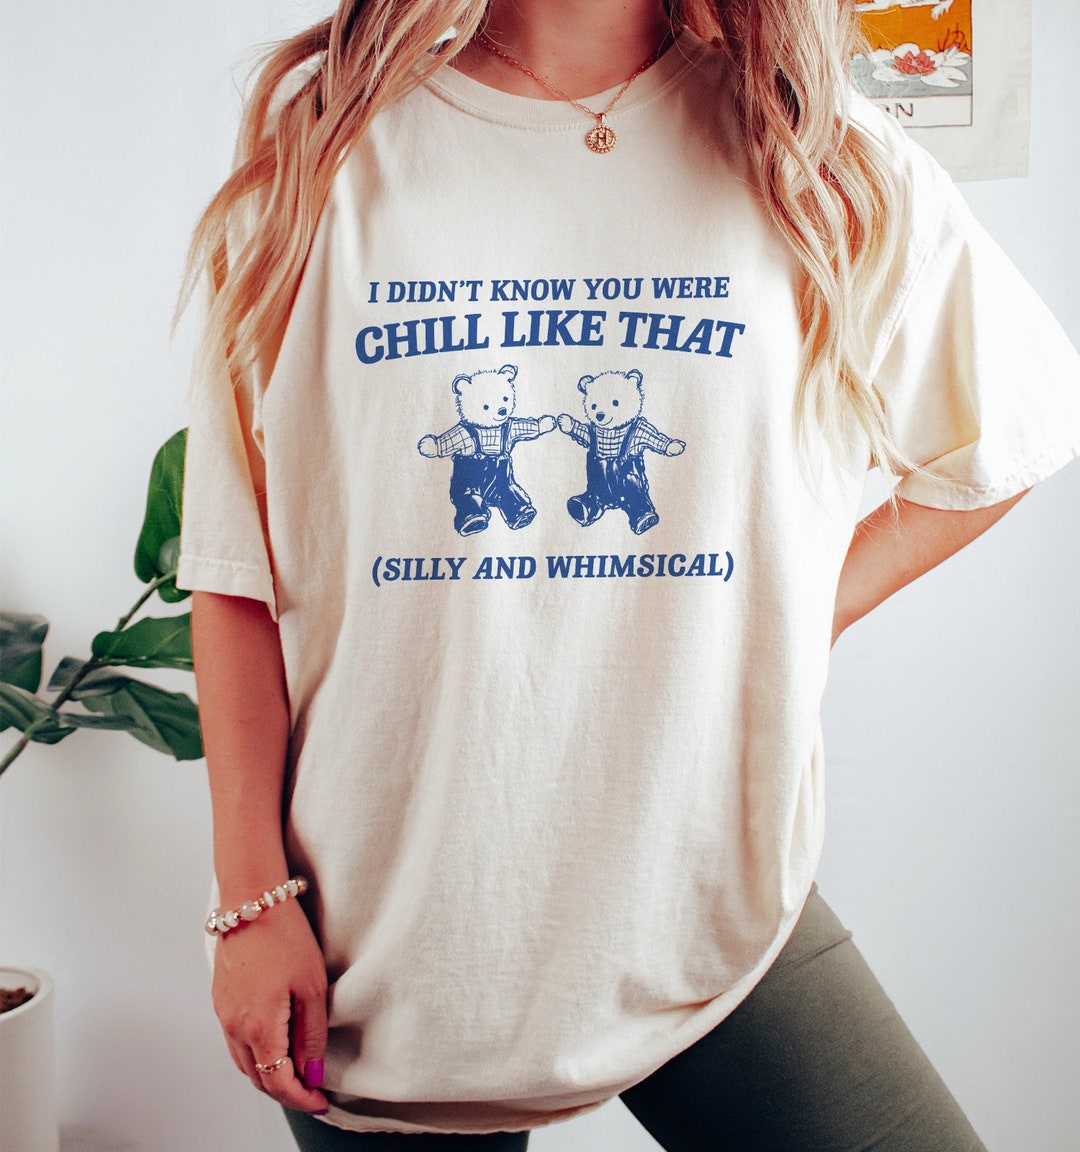 I Didn't Know You Were Chill Like That, Unisex Meme T Shirt, Funny T ...